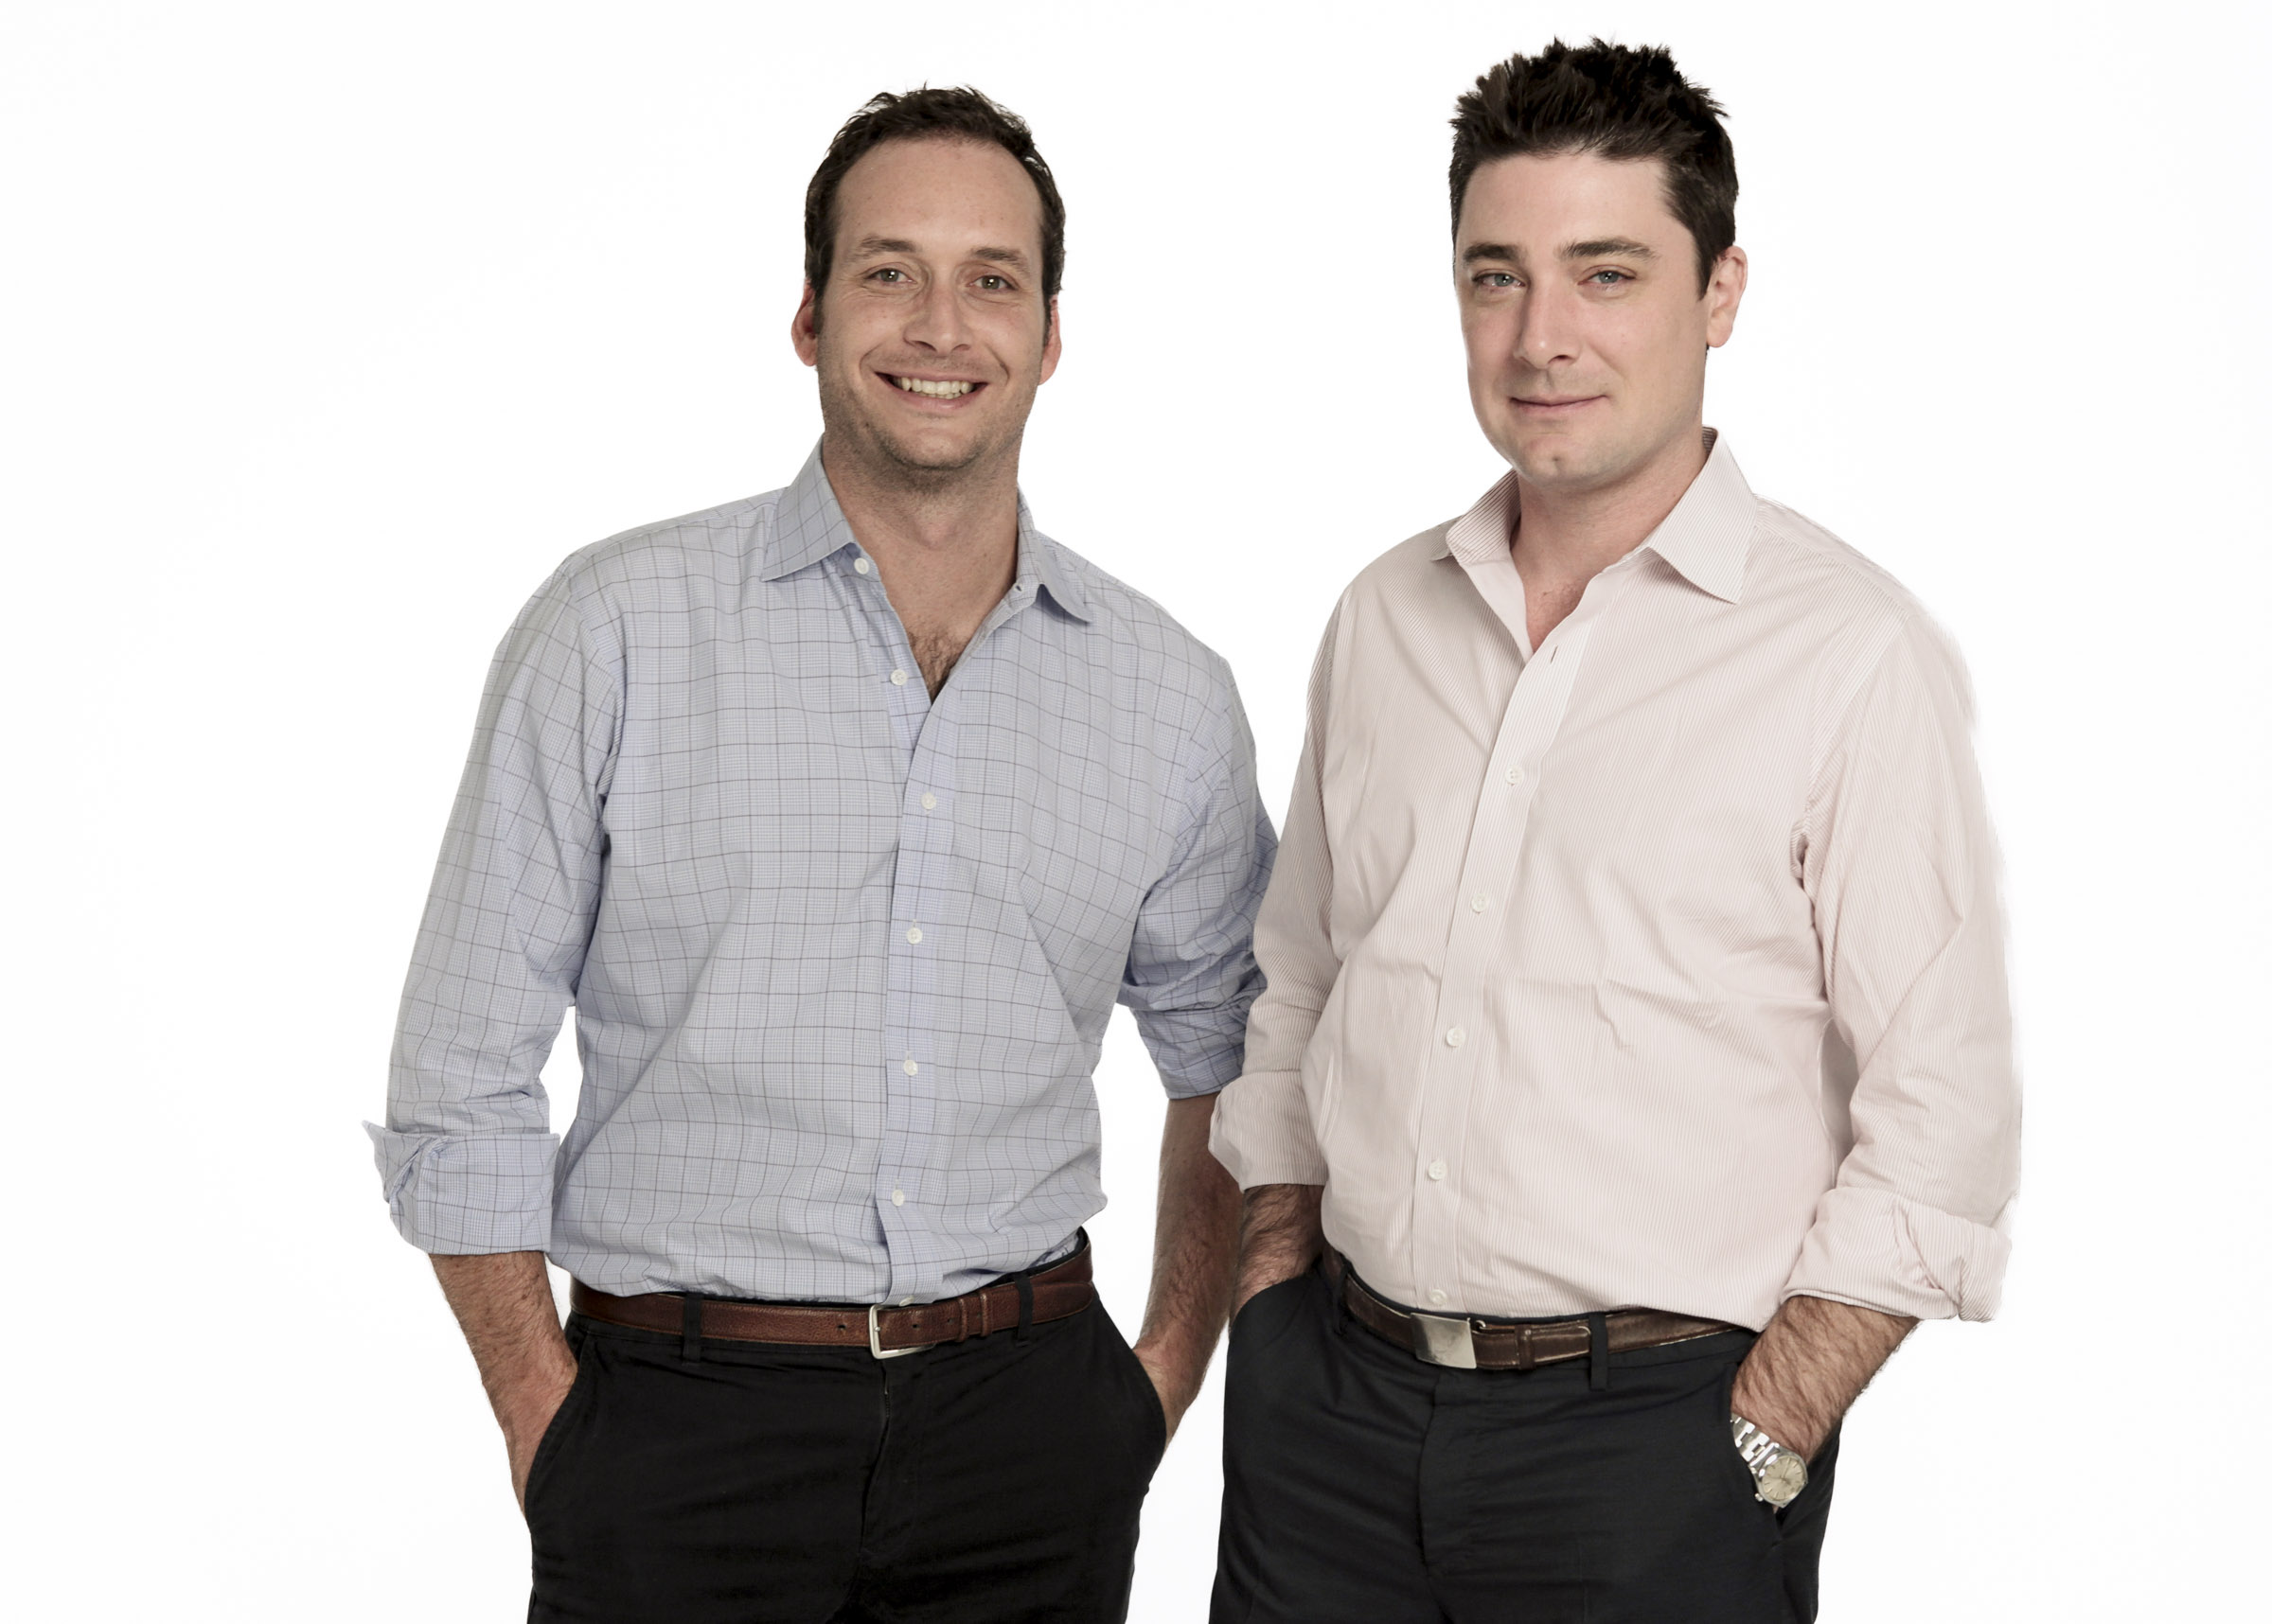 Matador Content co-founders Todd Lubin (left) and Jay Peterson (right), Content Producers, Executive Branding Portrait by Tess Steinkolk, NYC Corporate CEO Photographer